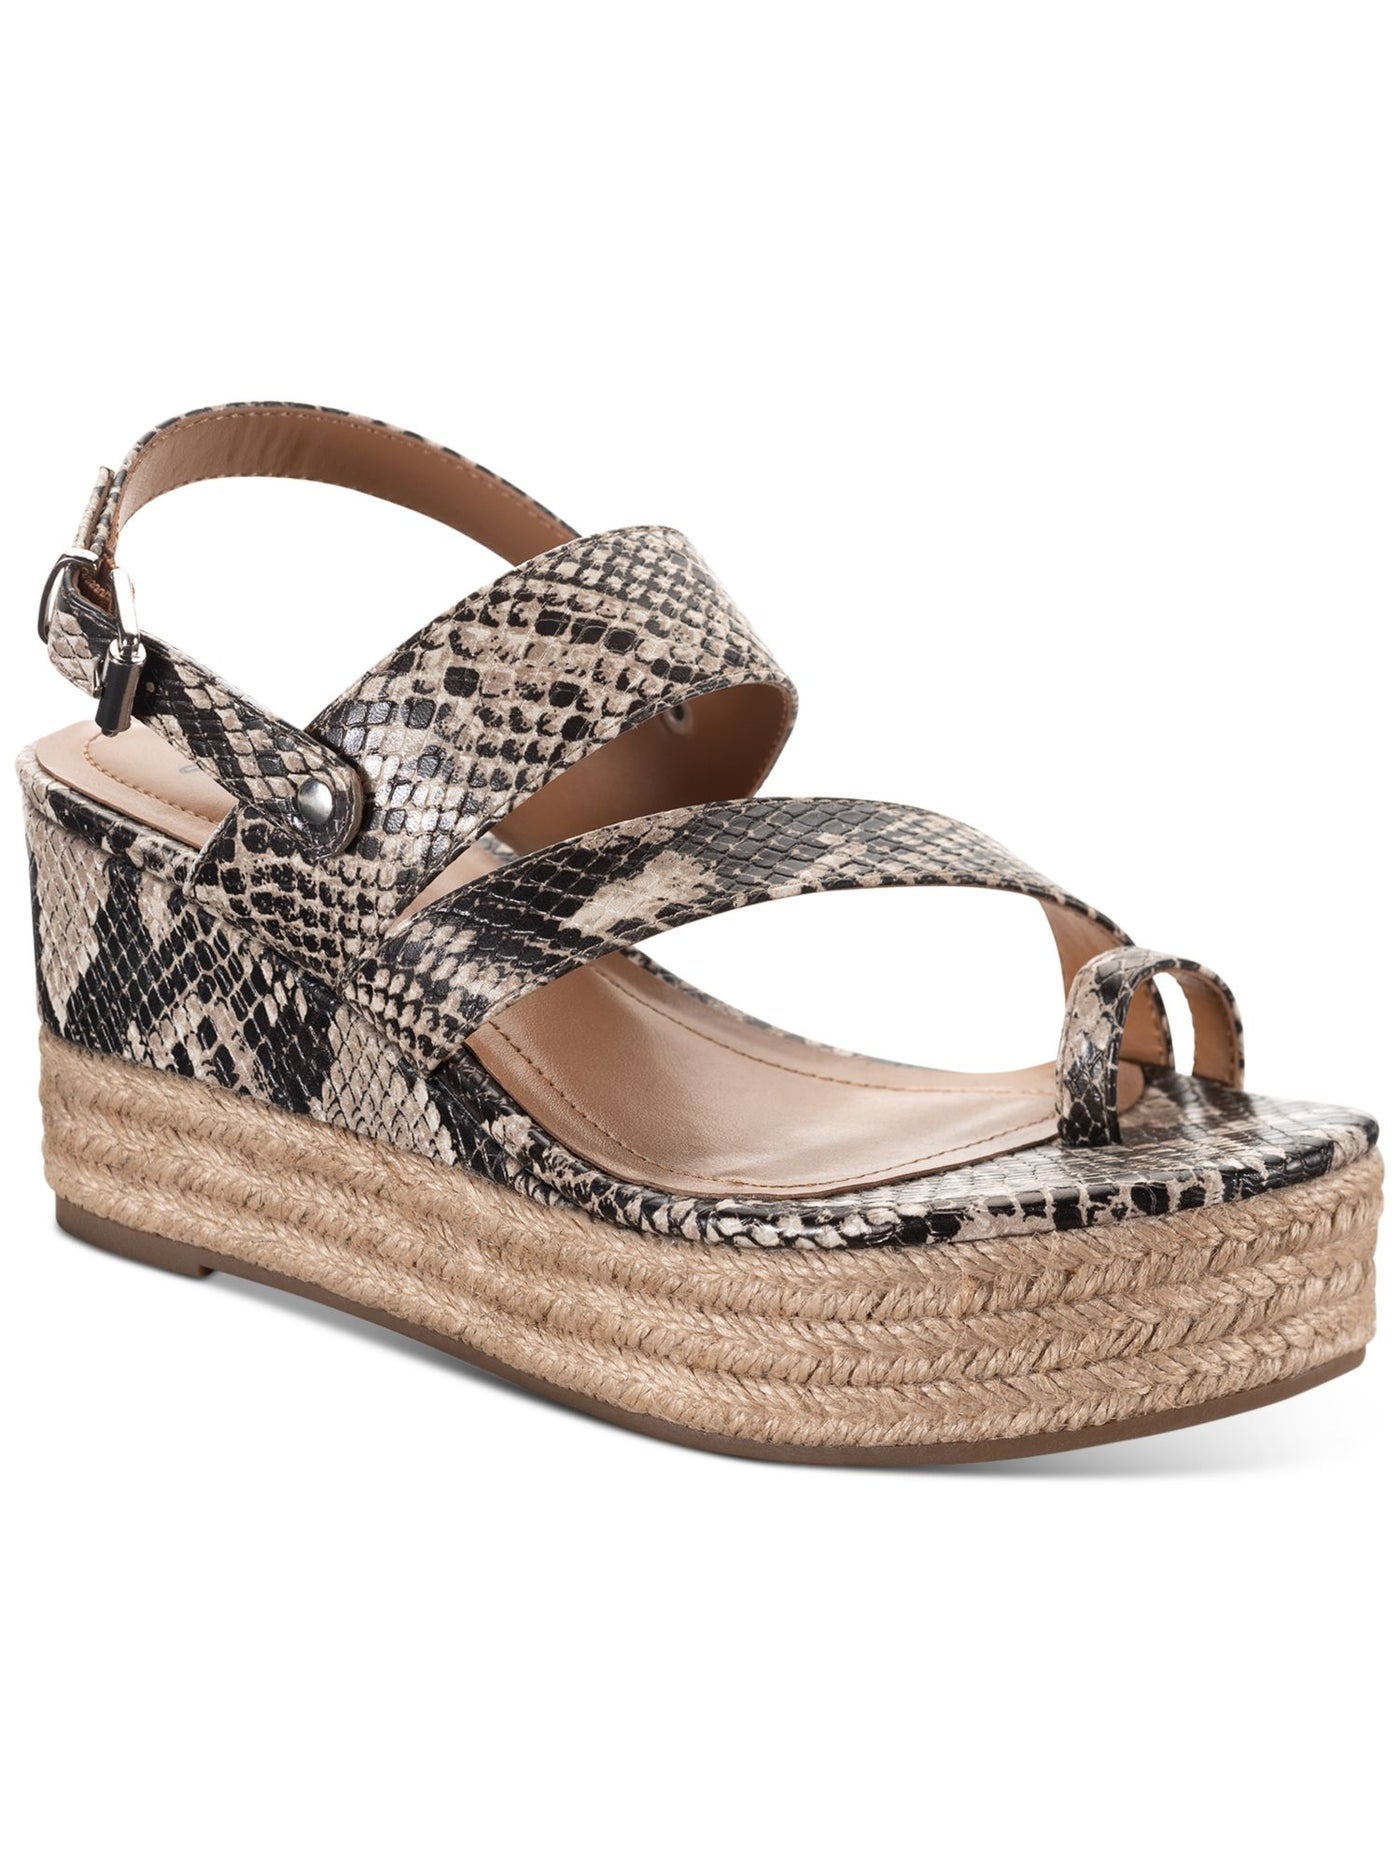 STYLE & COMPANY Womens Beige 1-1/2" Platform Asymmetrical Padded Bettyy Round Toe Wedge Buckle Espadrille Shoes 8 M